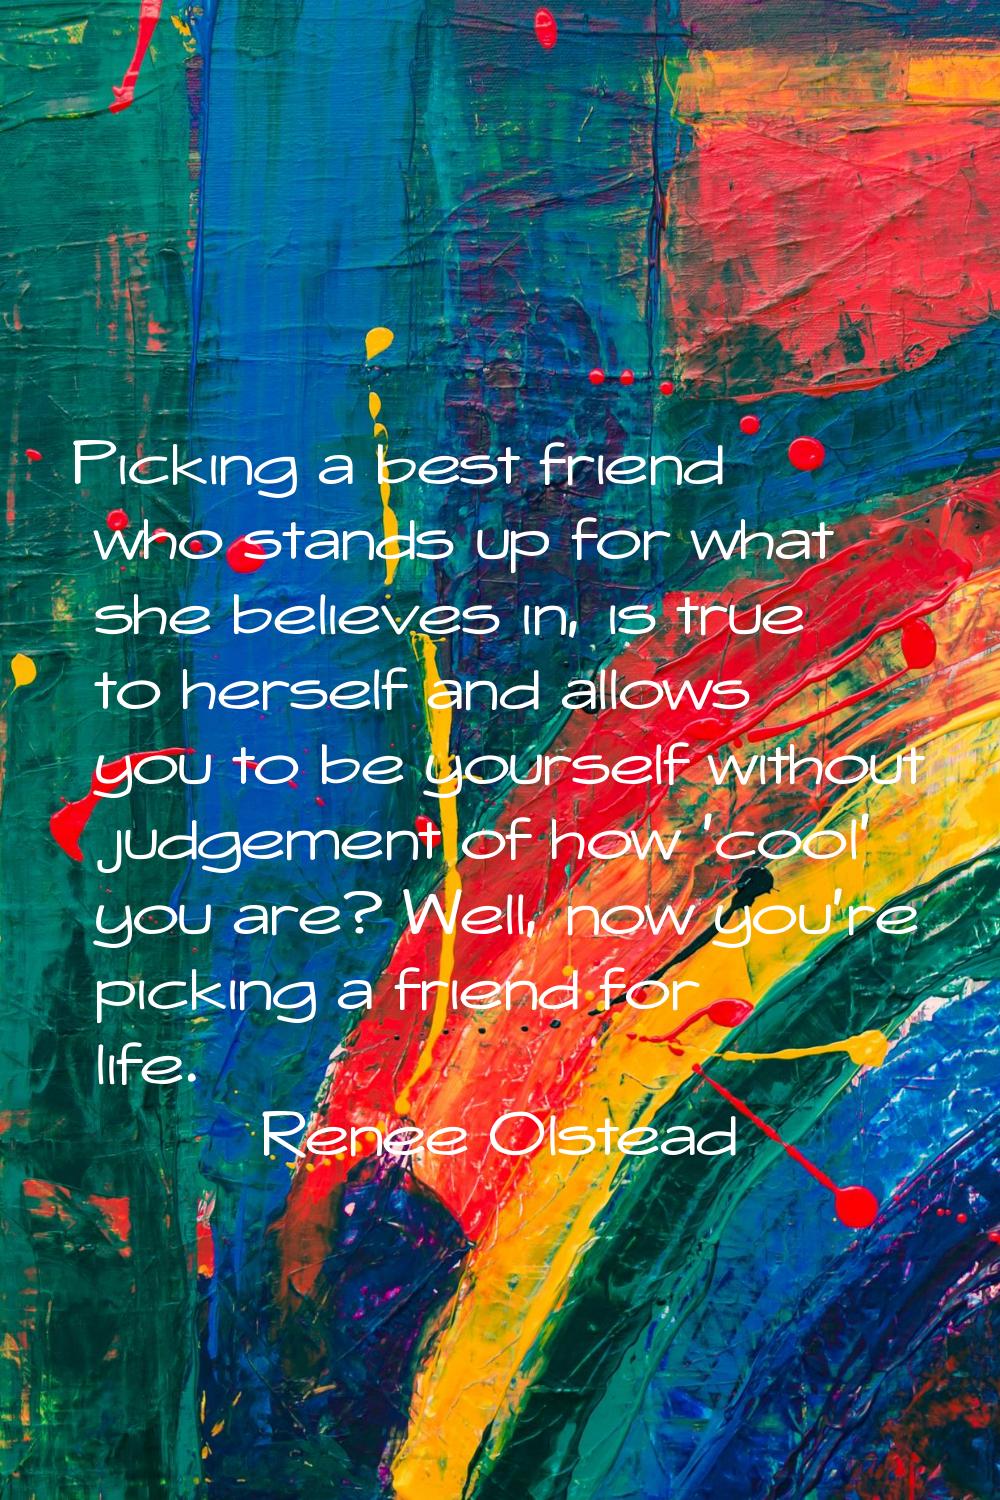 Picking a best friend who stands up for what she believes in, is true to herself and allows you to 